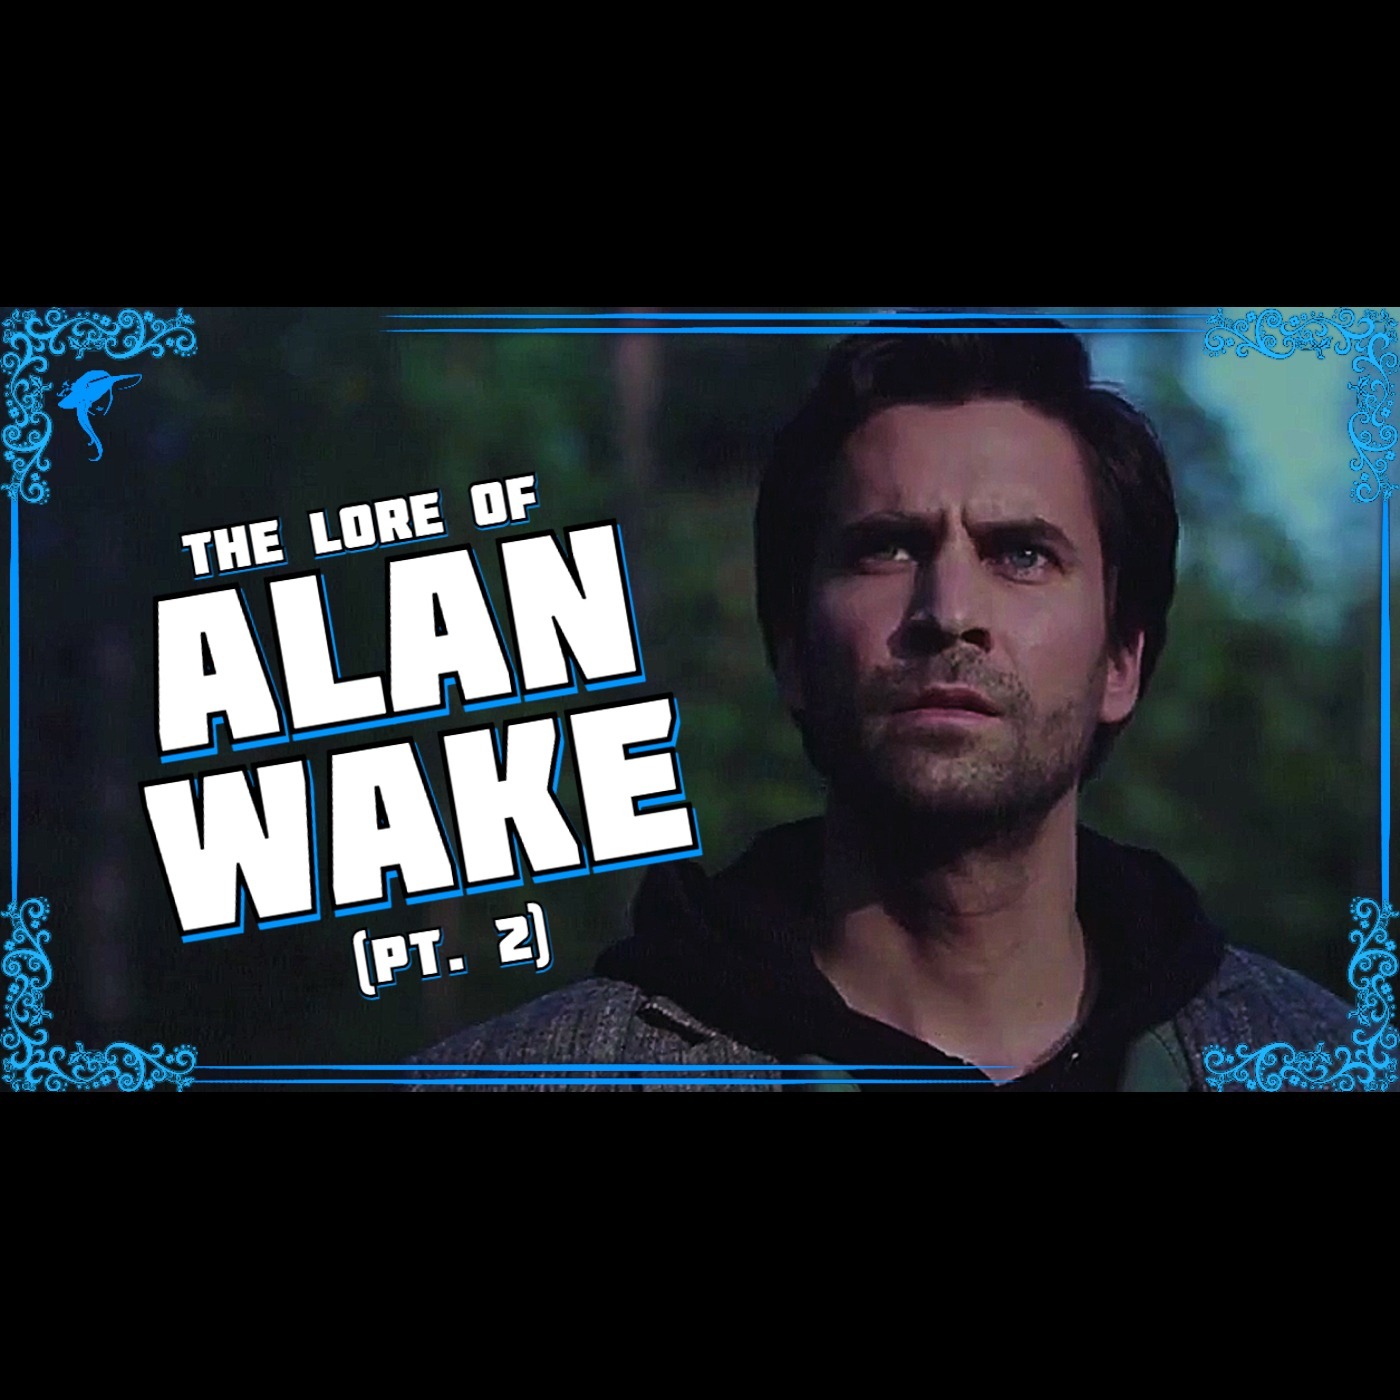 Alan Wake (Pt. 2): The Writer Who Fought Darkness